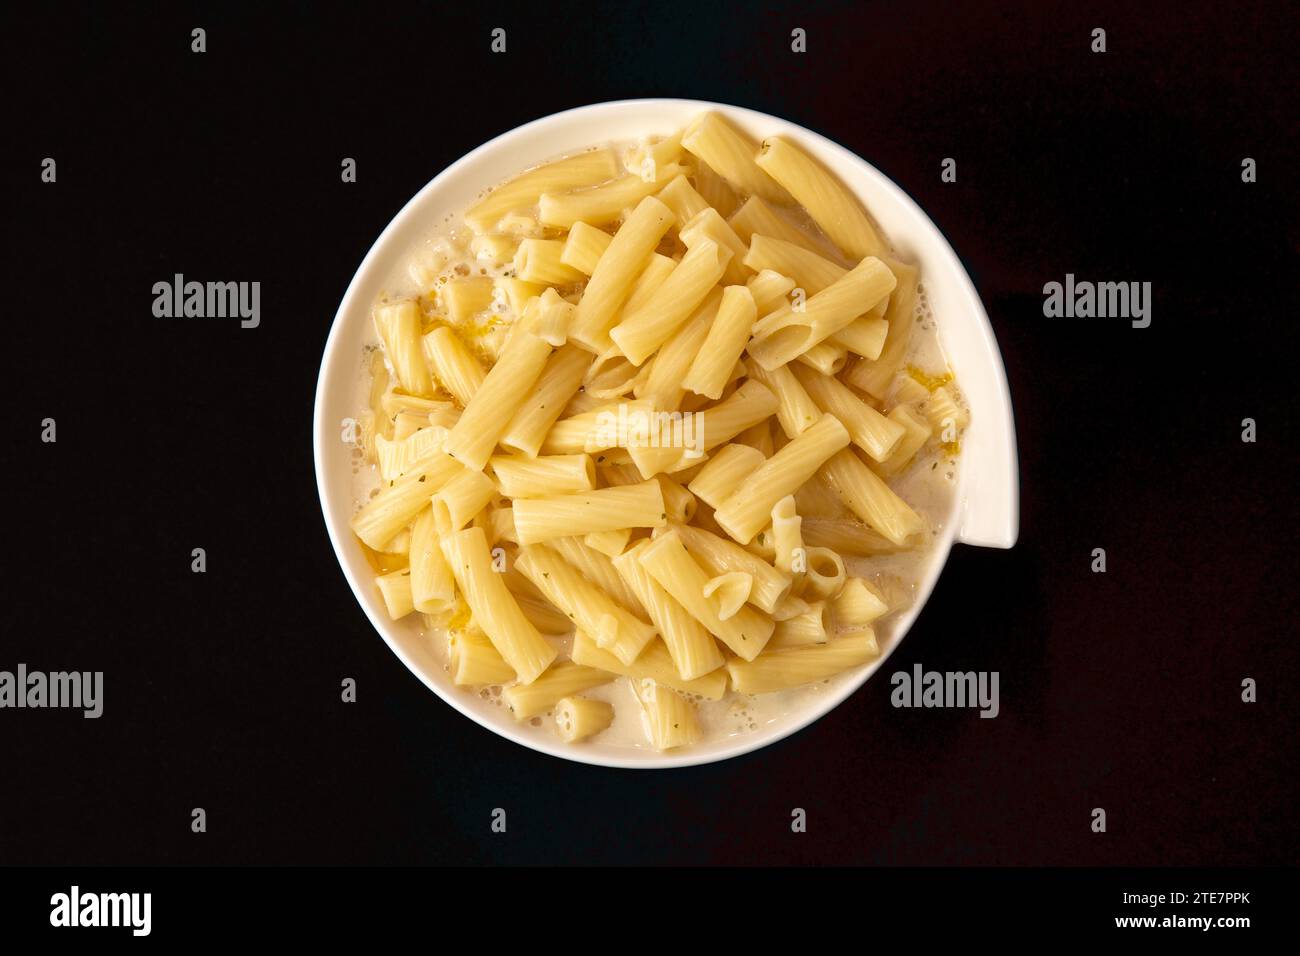 Portion of Macaroni and Cheese Stock Photo